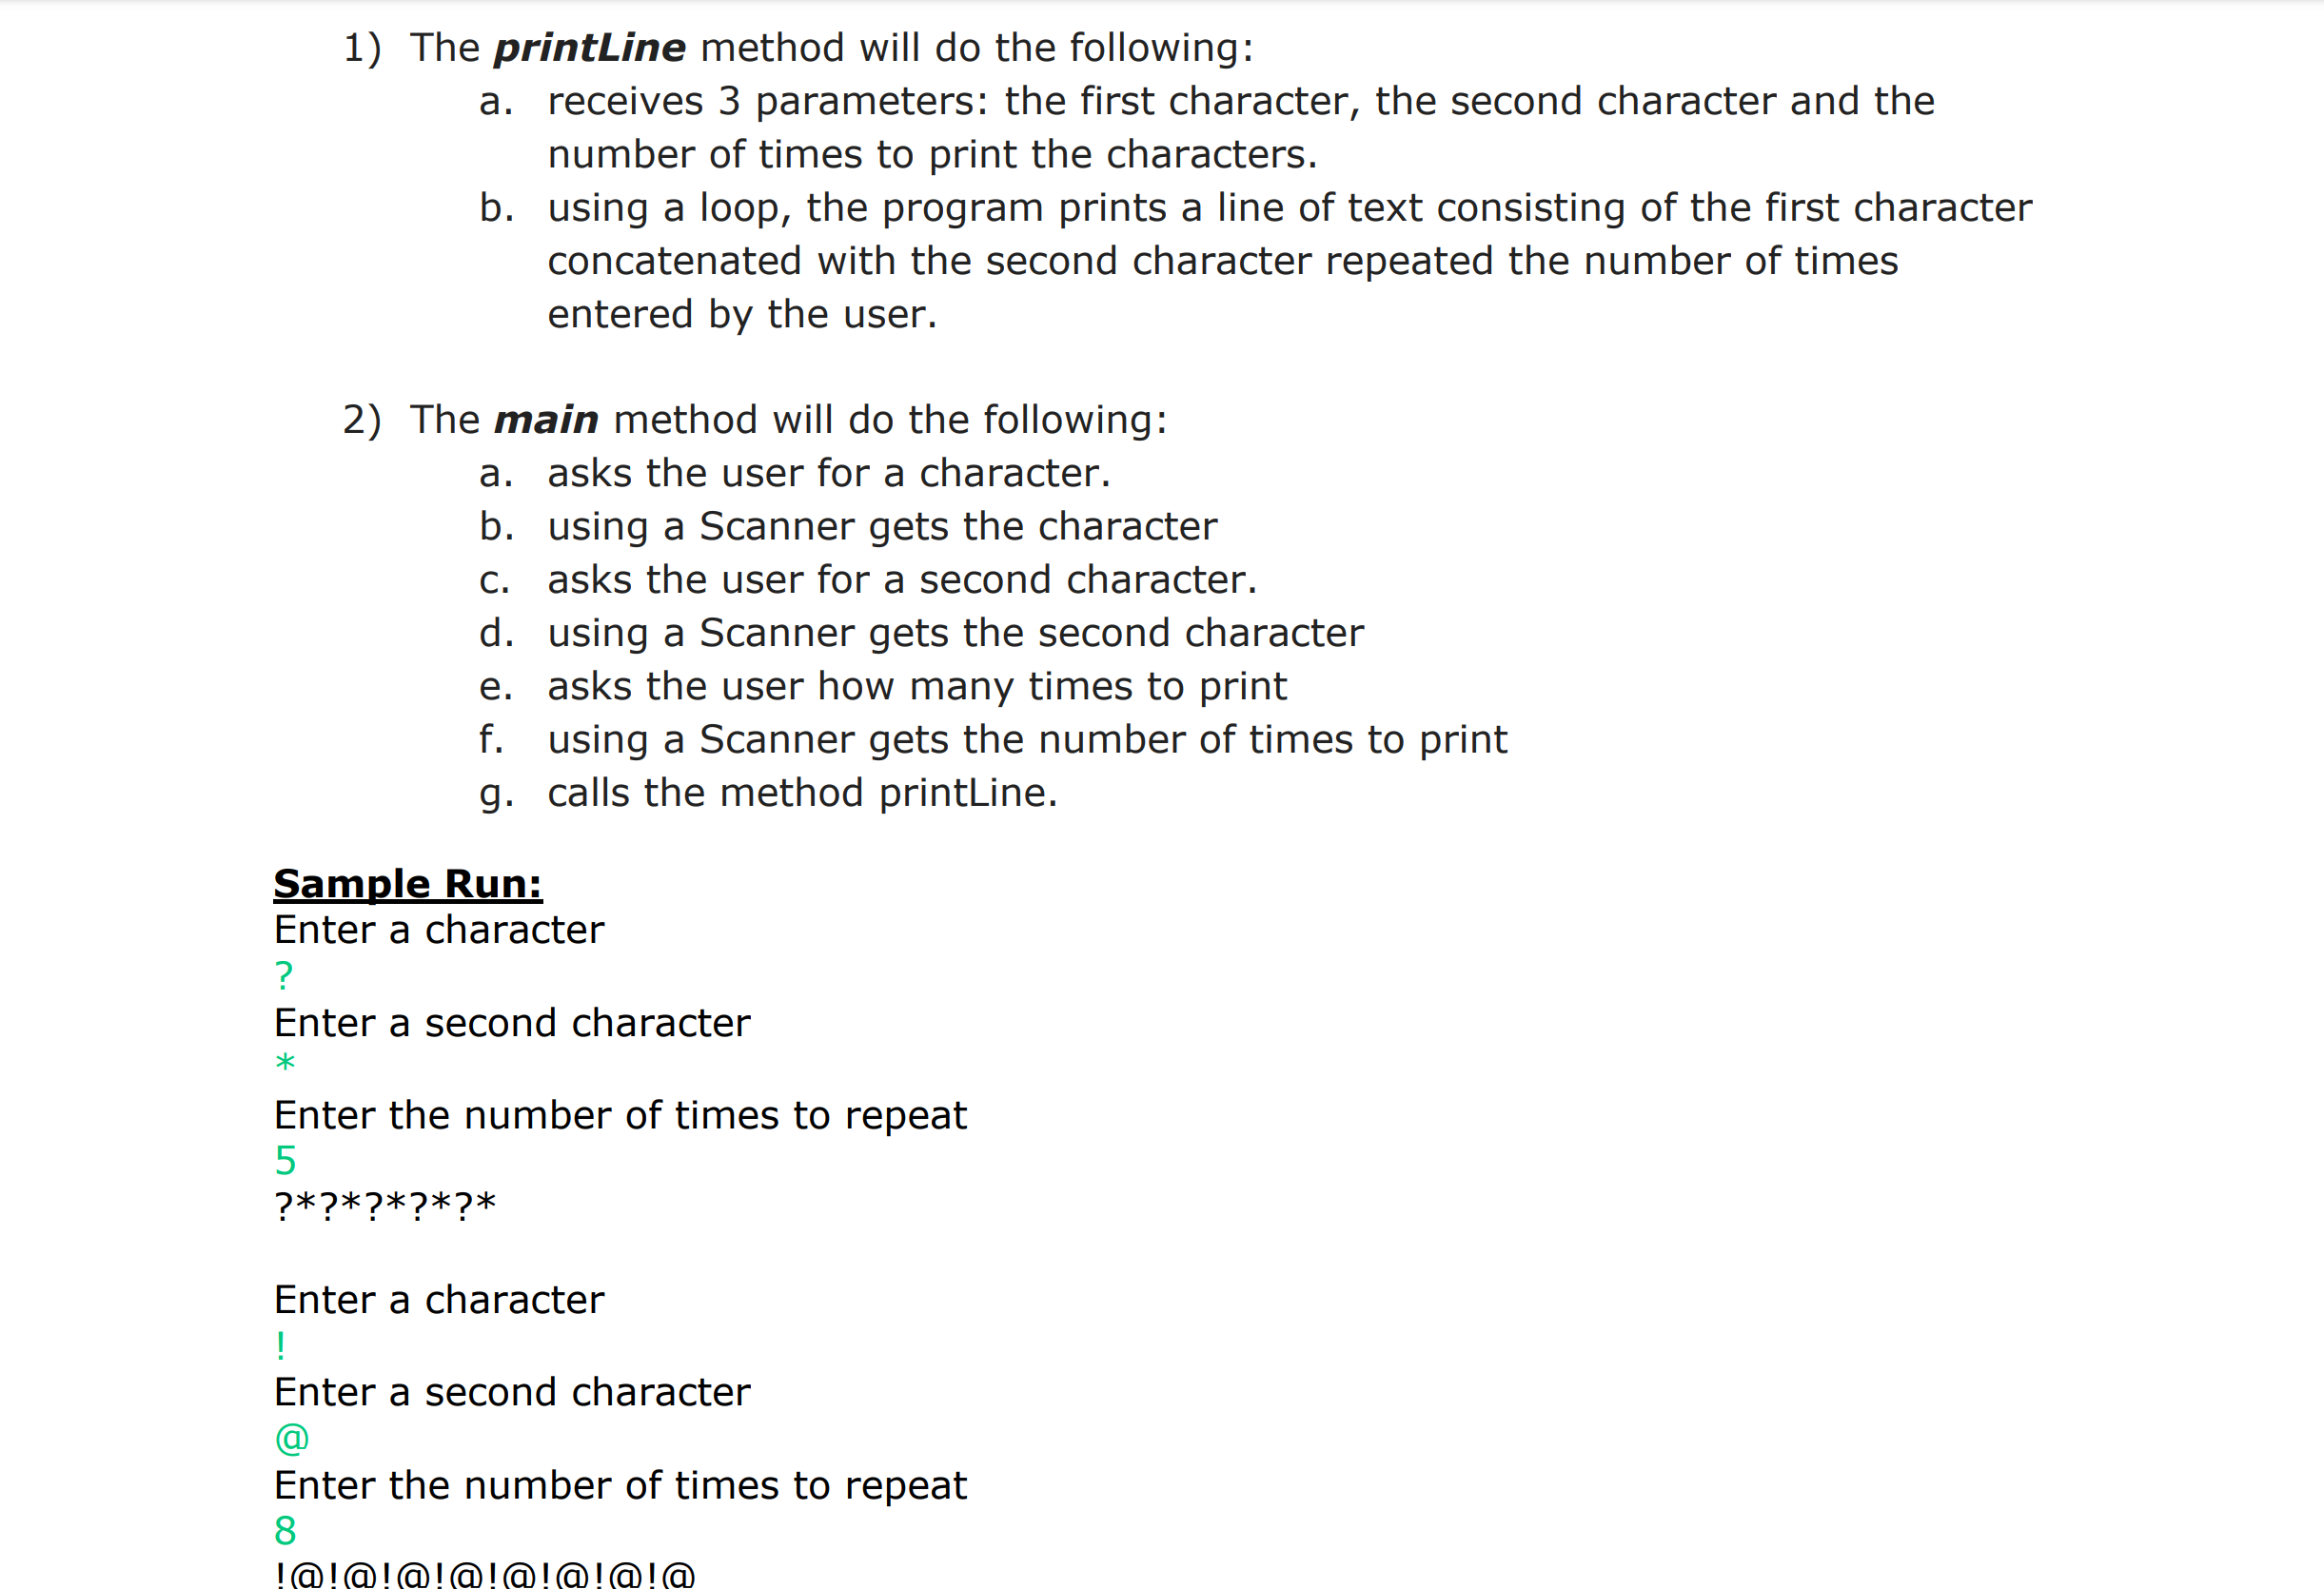 1) The printine method will do the following:
a. receives 3 parameters: the first character, the second character and the
number of times to print the characters.
b. using a loop, the program prints a line of text consisting of the first character
concatenated with the second character repeated the number of times
entered by the user.
2) The main method will do the following:
a. asks the user for a character.
b. using a Scanner gets the character
c. asks the user for a second character.
d. using a Scanner gets the second character
e. asks the user how many times to print
f. using a Scanner gets the number of times to print
g. calls the method printLine.
Sample Run:
Enter a character
Enter a second character
Enter the number of times to repeat
5
Enter a character
Enter a second character
Enter the number of times to repeat
8
